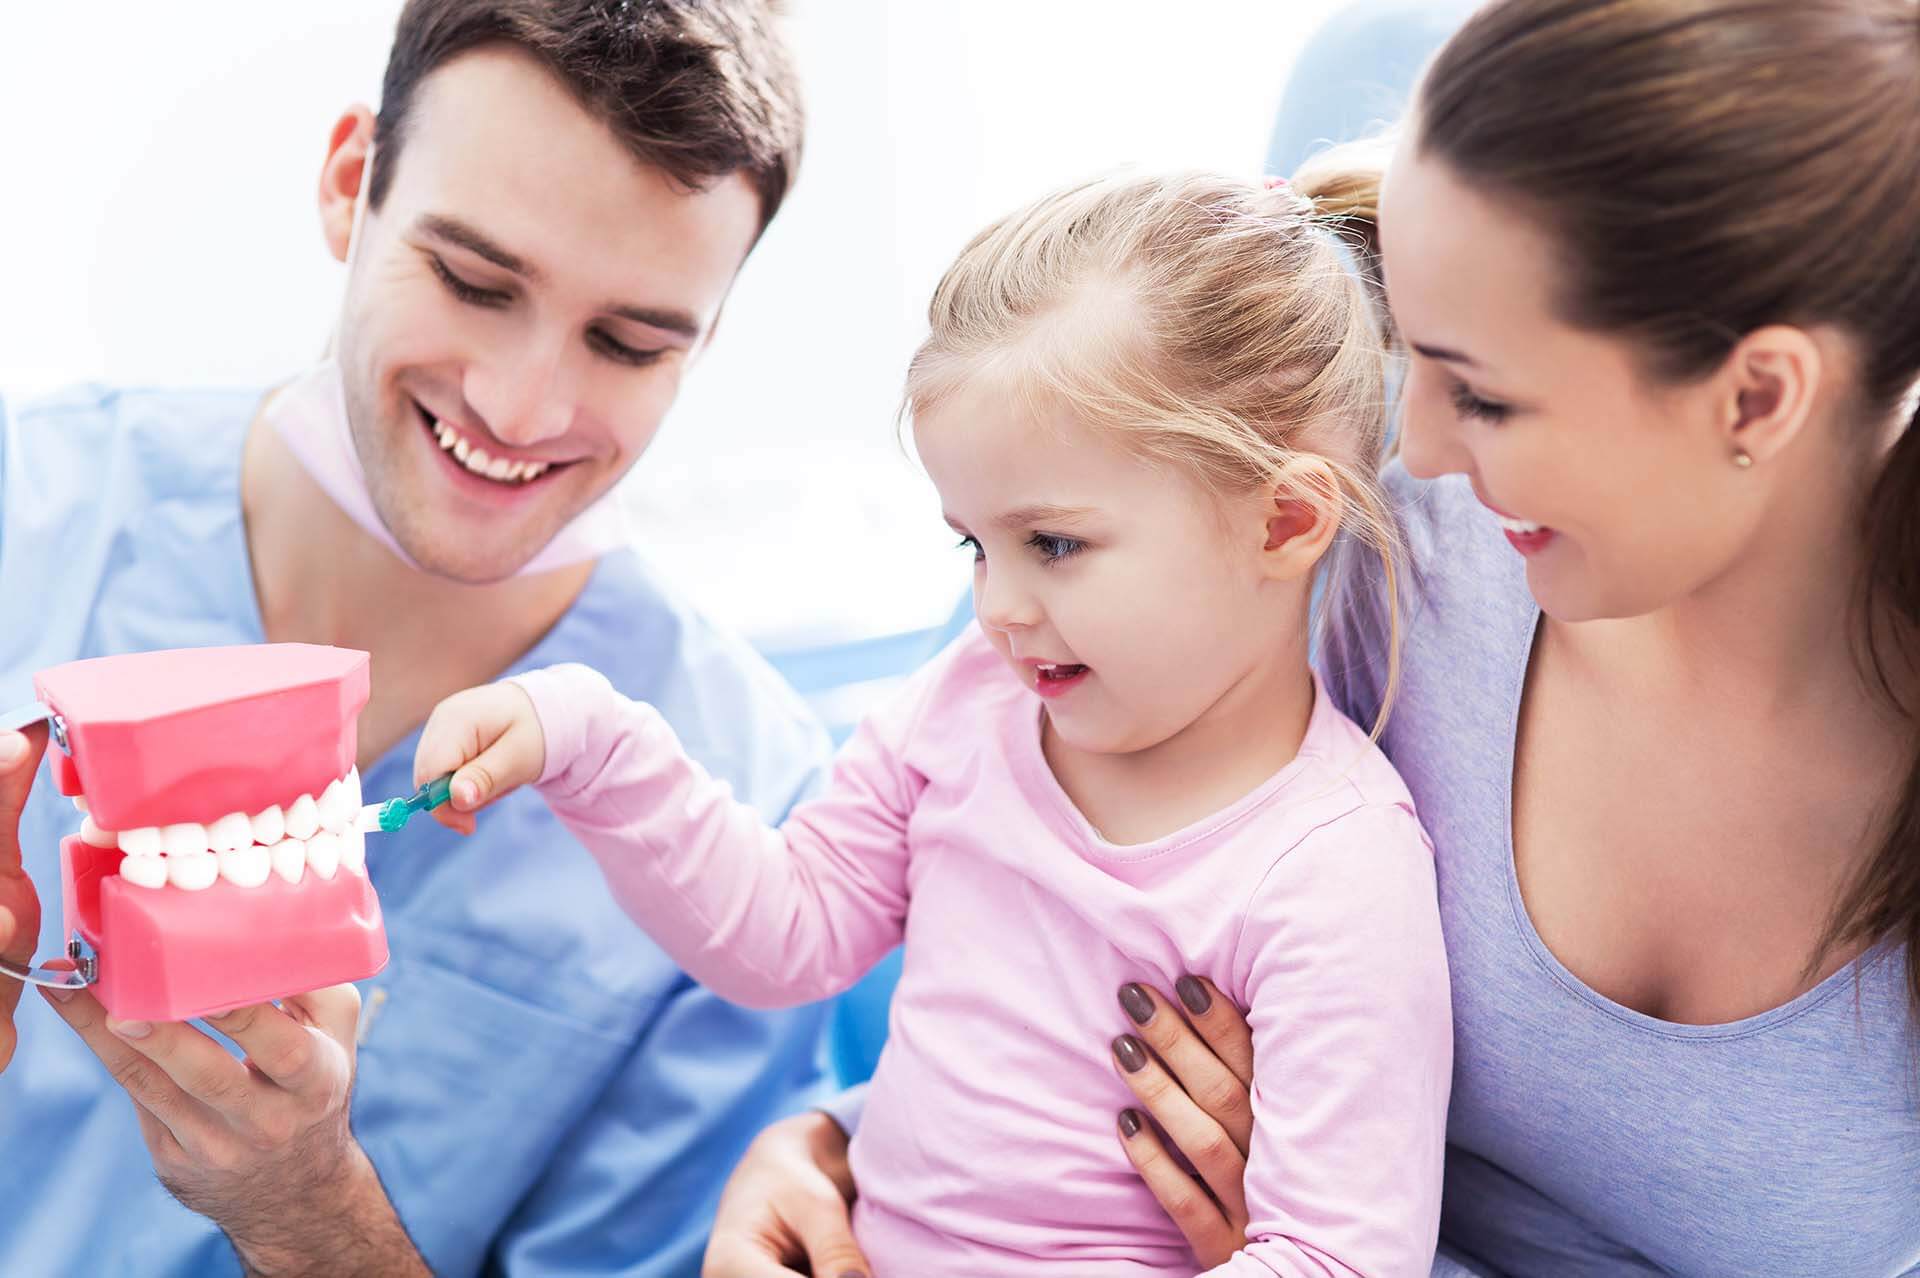 Children and Dental Care